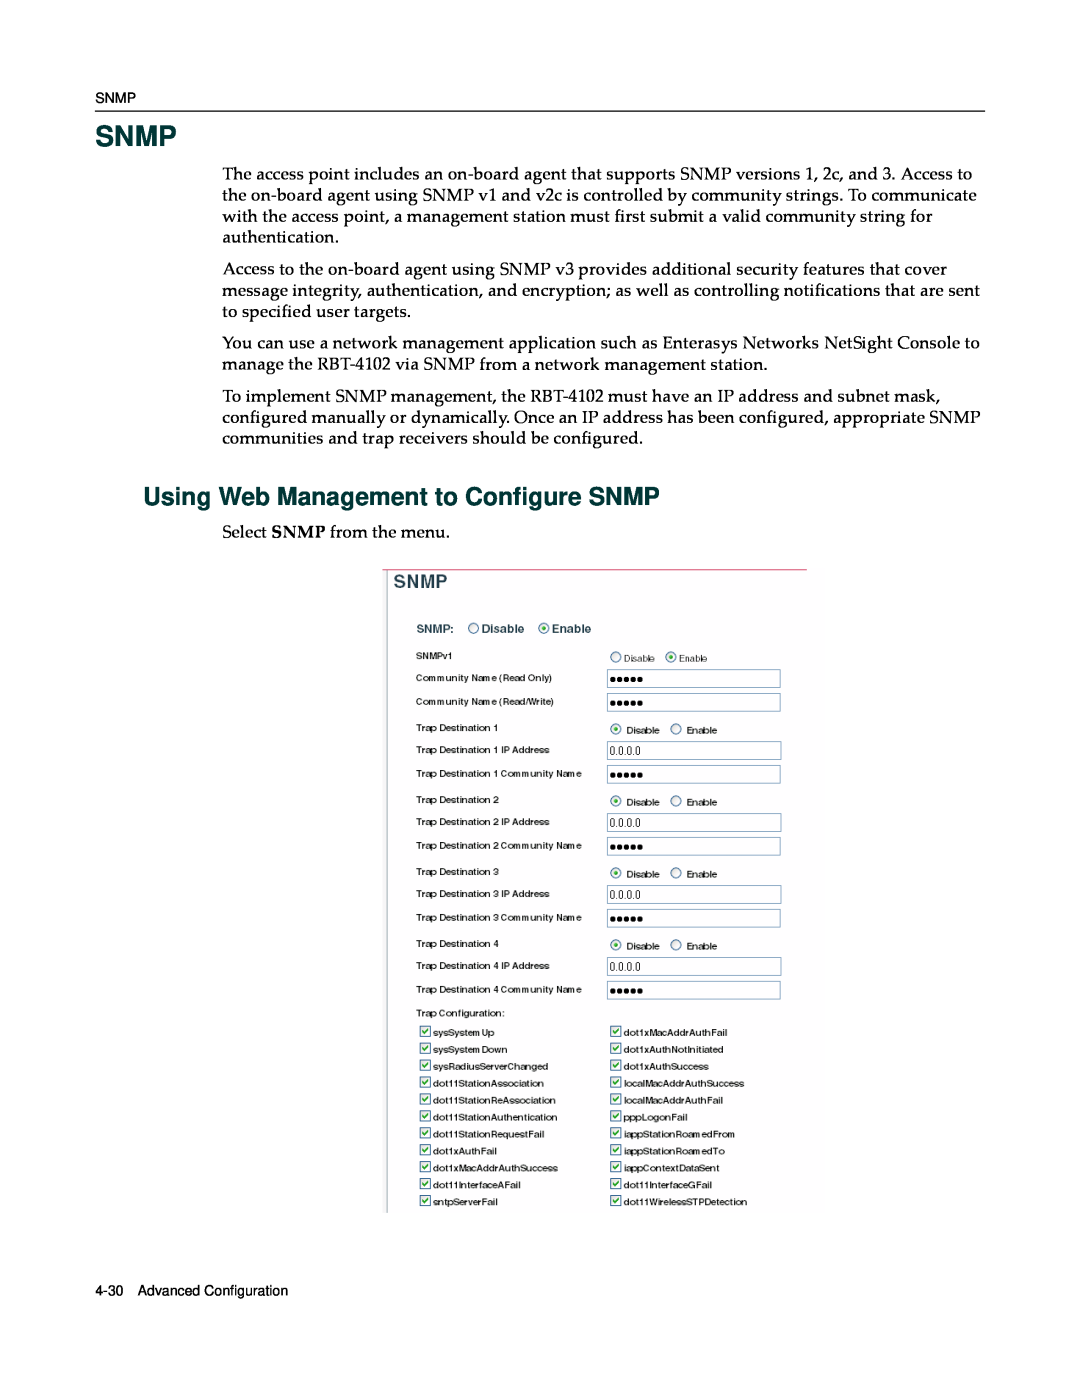 Enterasys Networks RBT-4102 manual Snmp, Using Web Management to Configure SNMP 